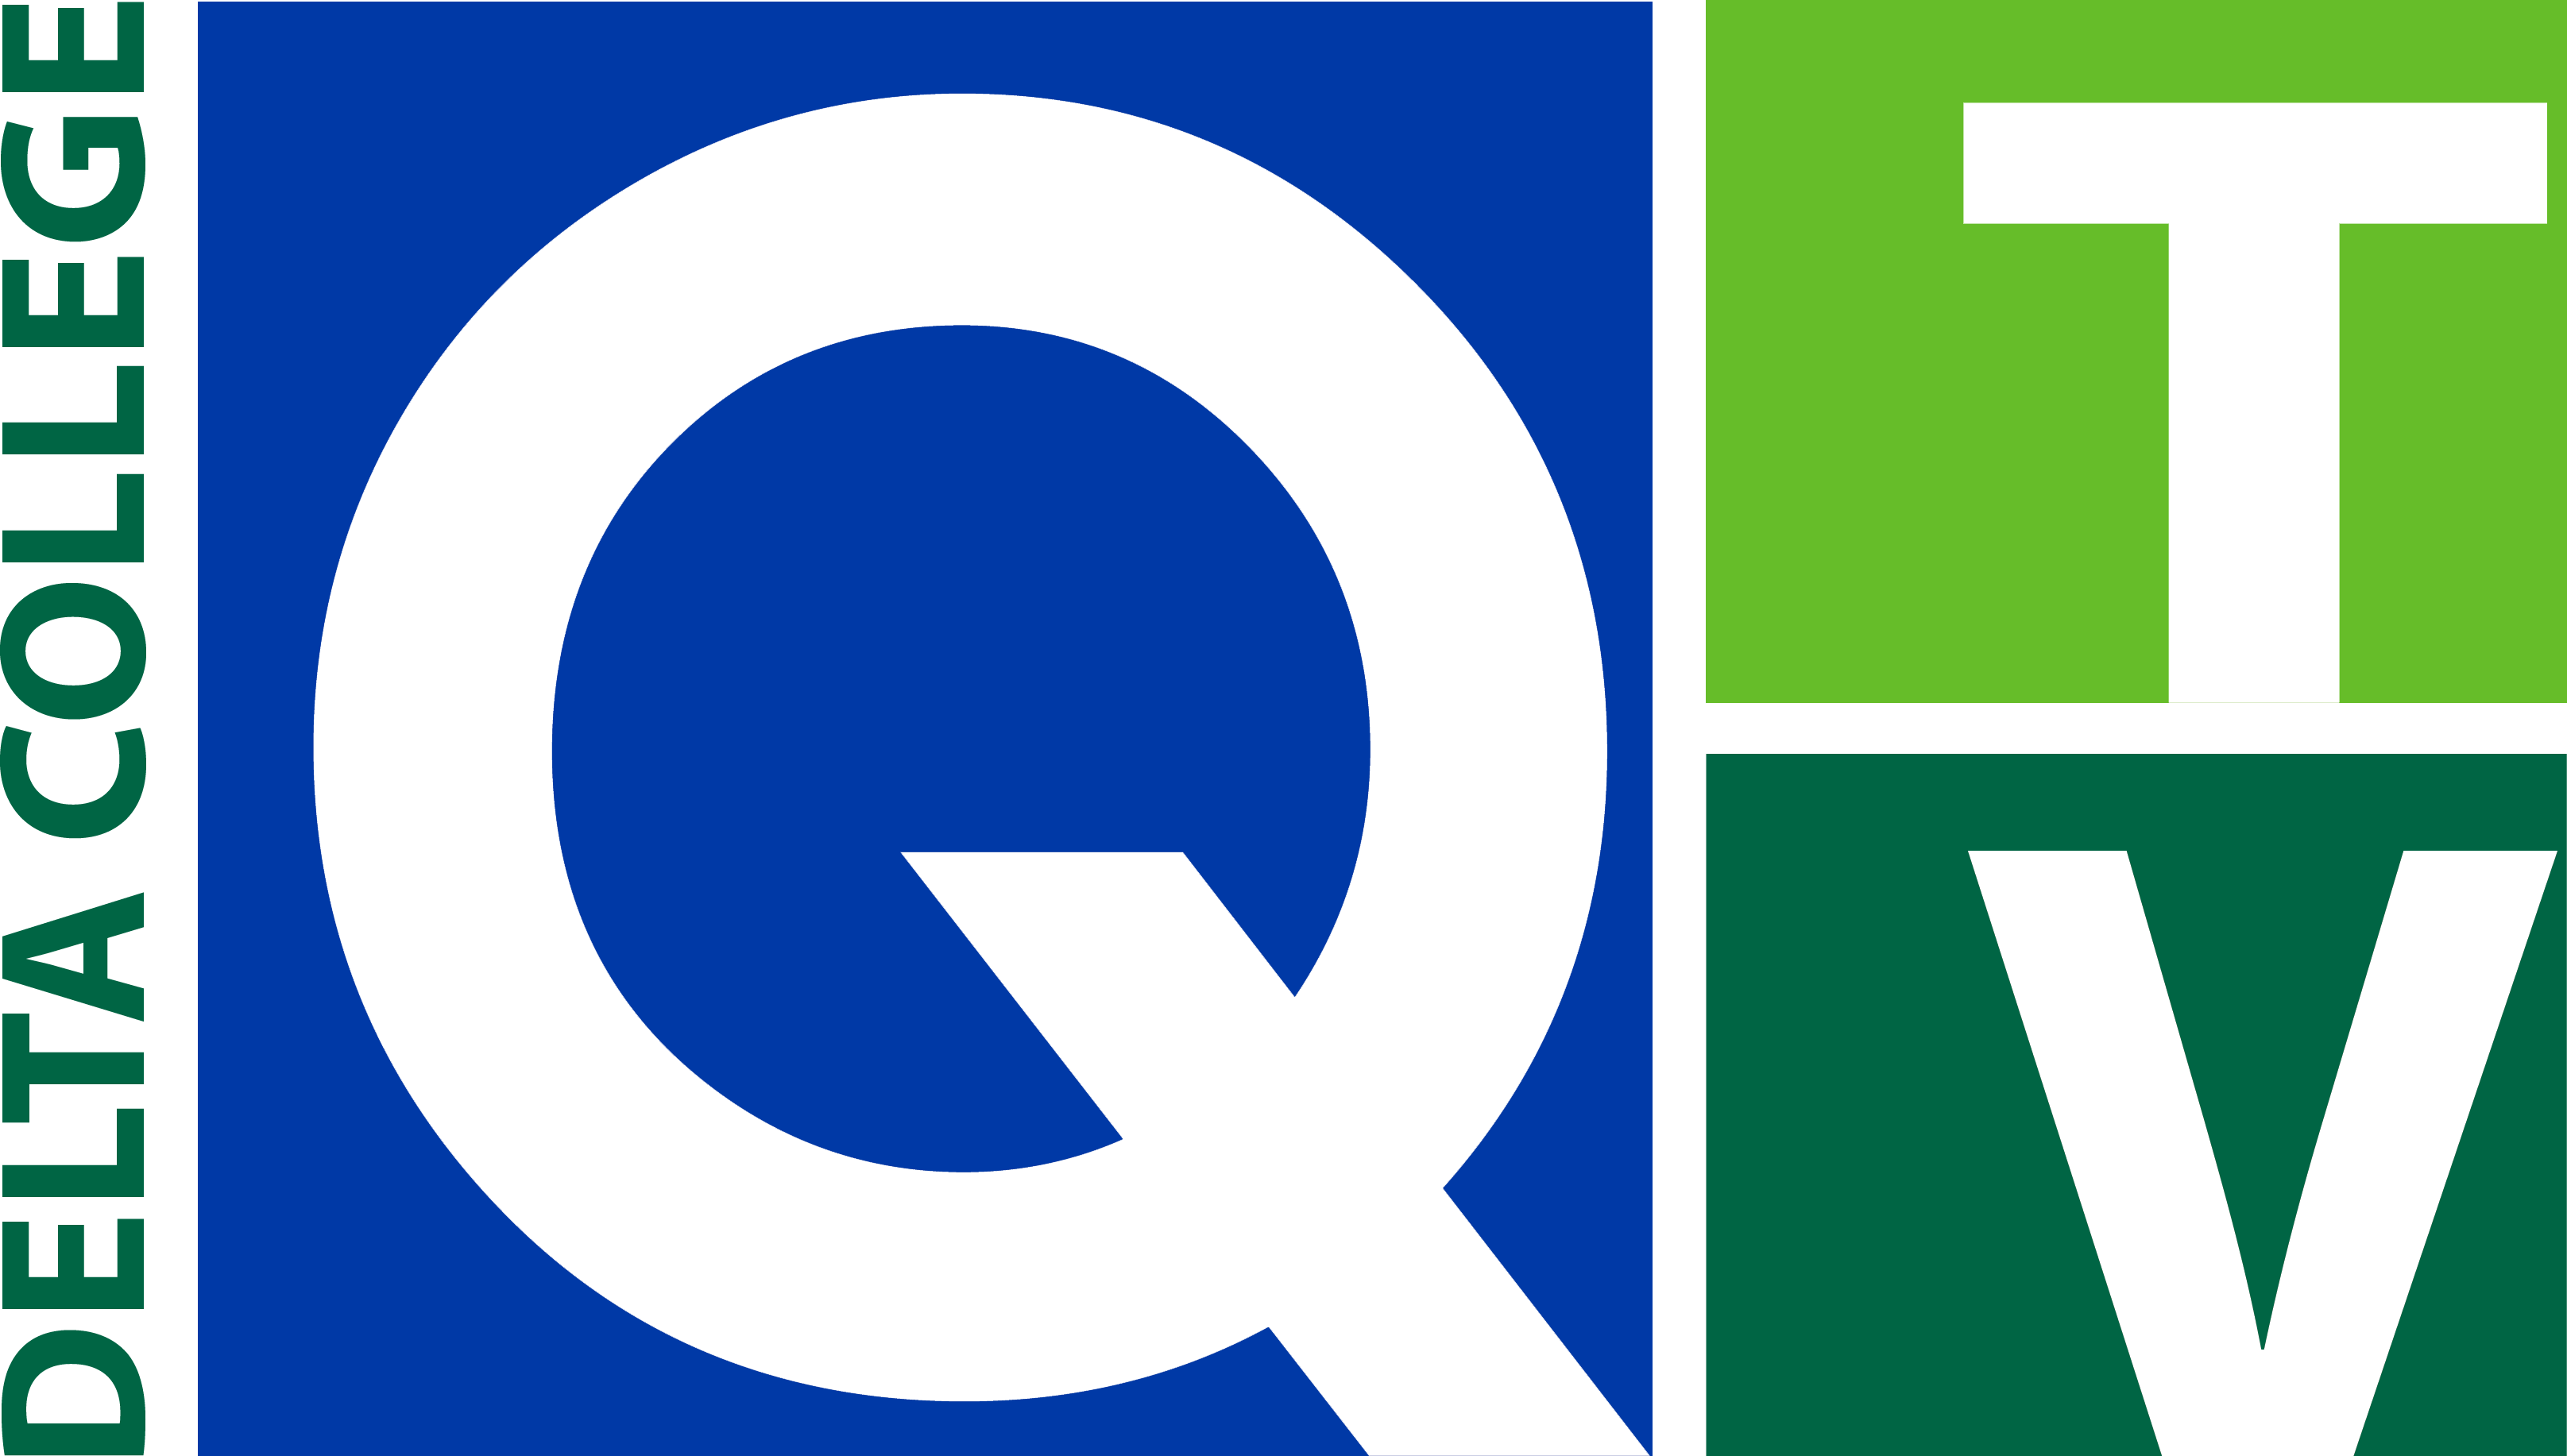 What Has a Blue Q Logo - Brand Resources